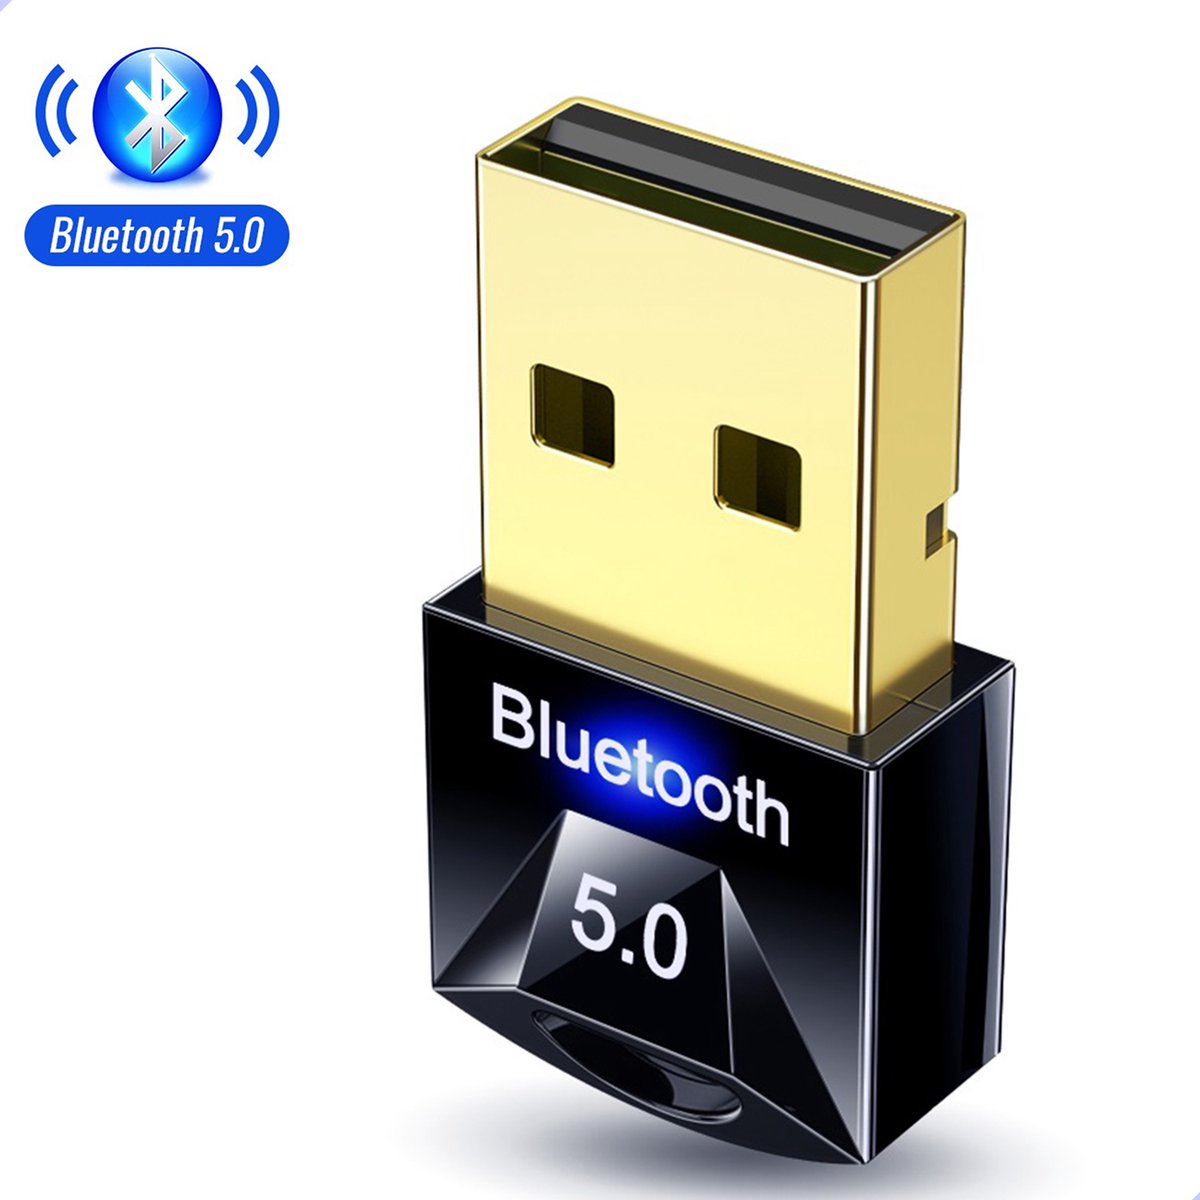 Bluetooth Adapter voor PC - BT 5.0 USB - Bluetooth Receiver - Bluetooth Dongle - USB Adapter - Bluetooth Ontvanger - Windows 11/10/8.1/8/7/XP - Exclusive by TW